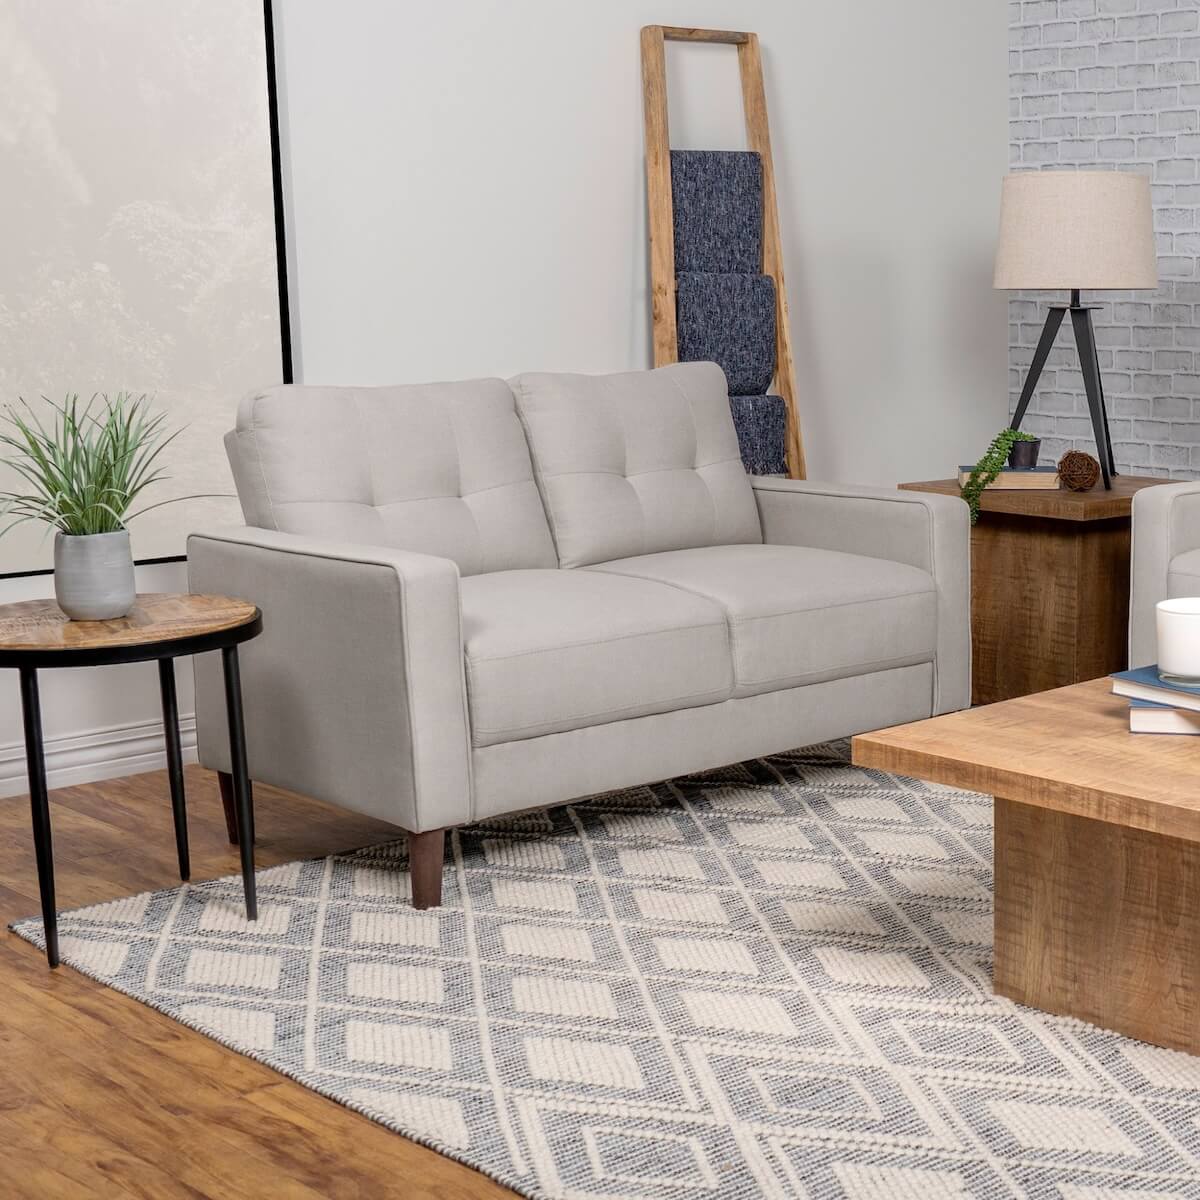 Small loveseat: Bowen Upholstered Track Arms Tufted Loveseat Beige